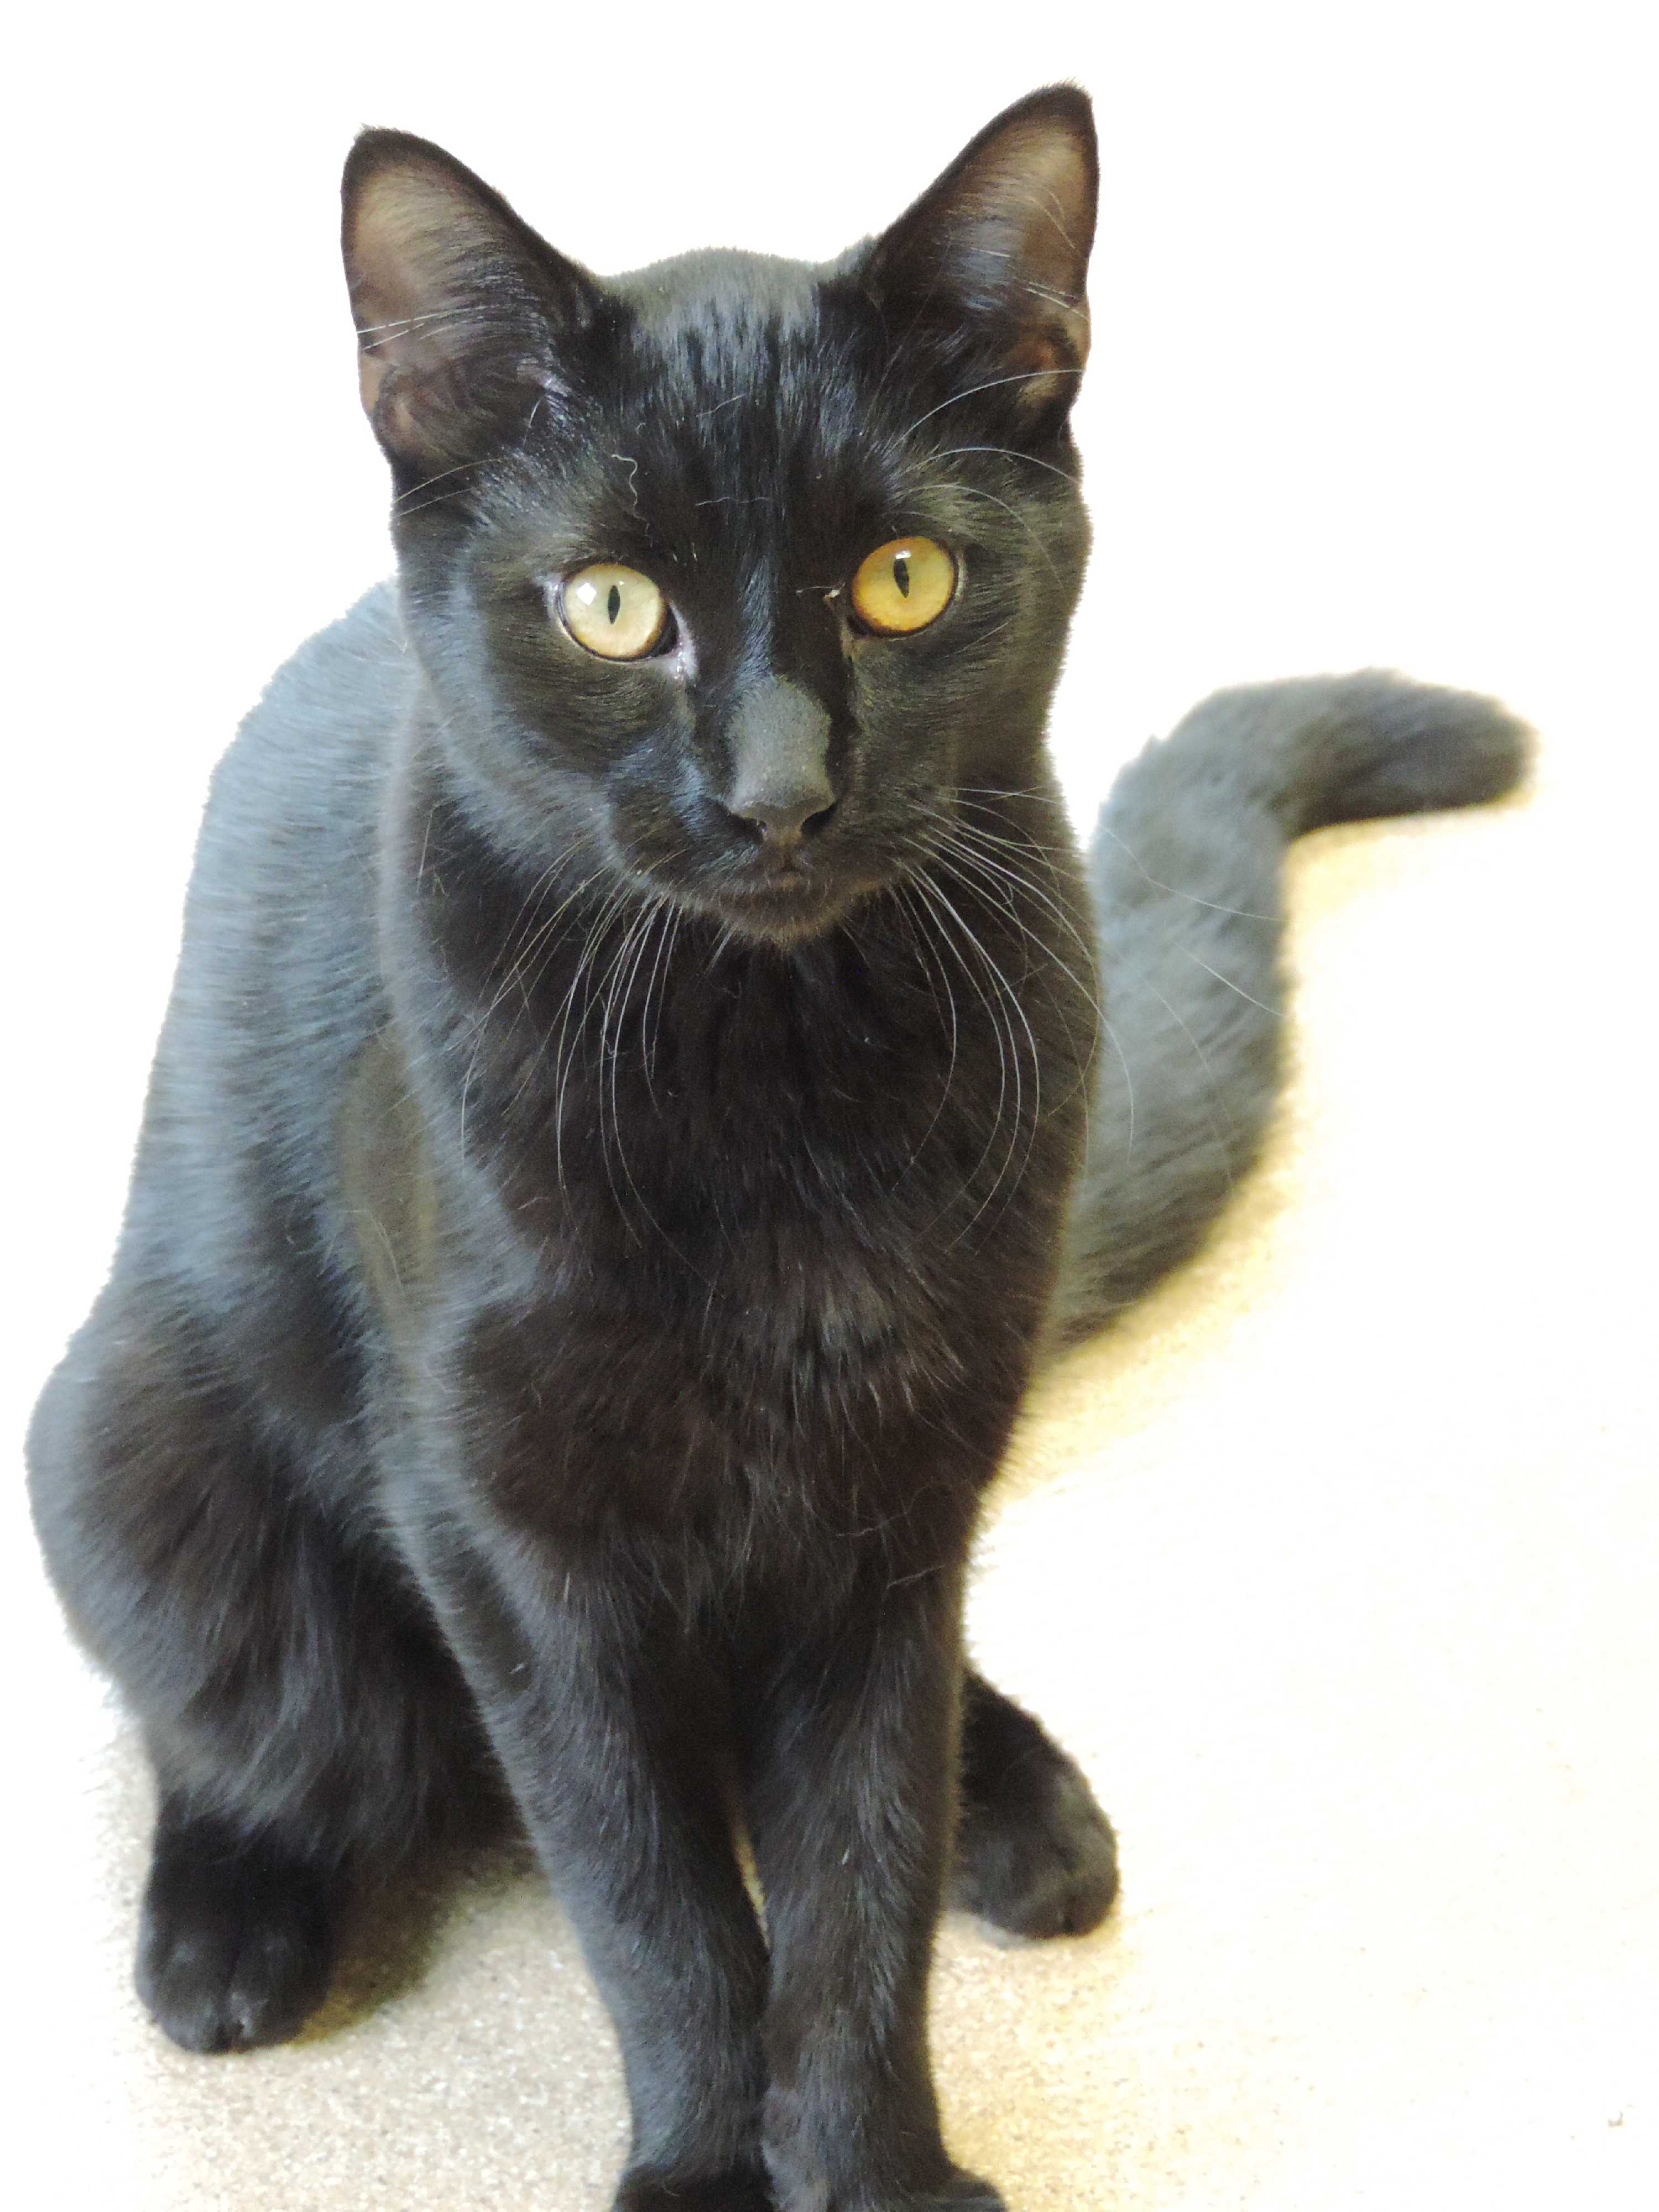 Brookings Sd Bombay Meet Sir Meows A Lot A Pet For Adoption,Condensed Milk Microwave Fudge